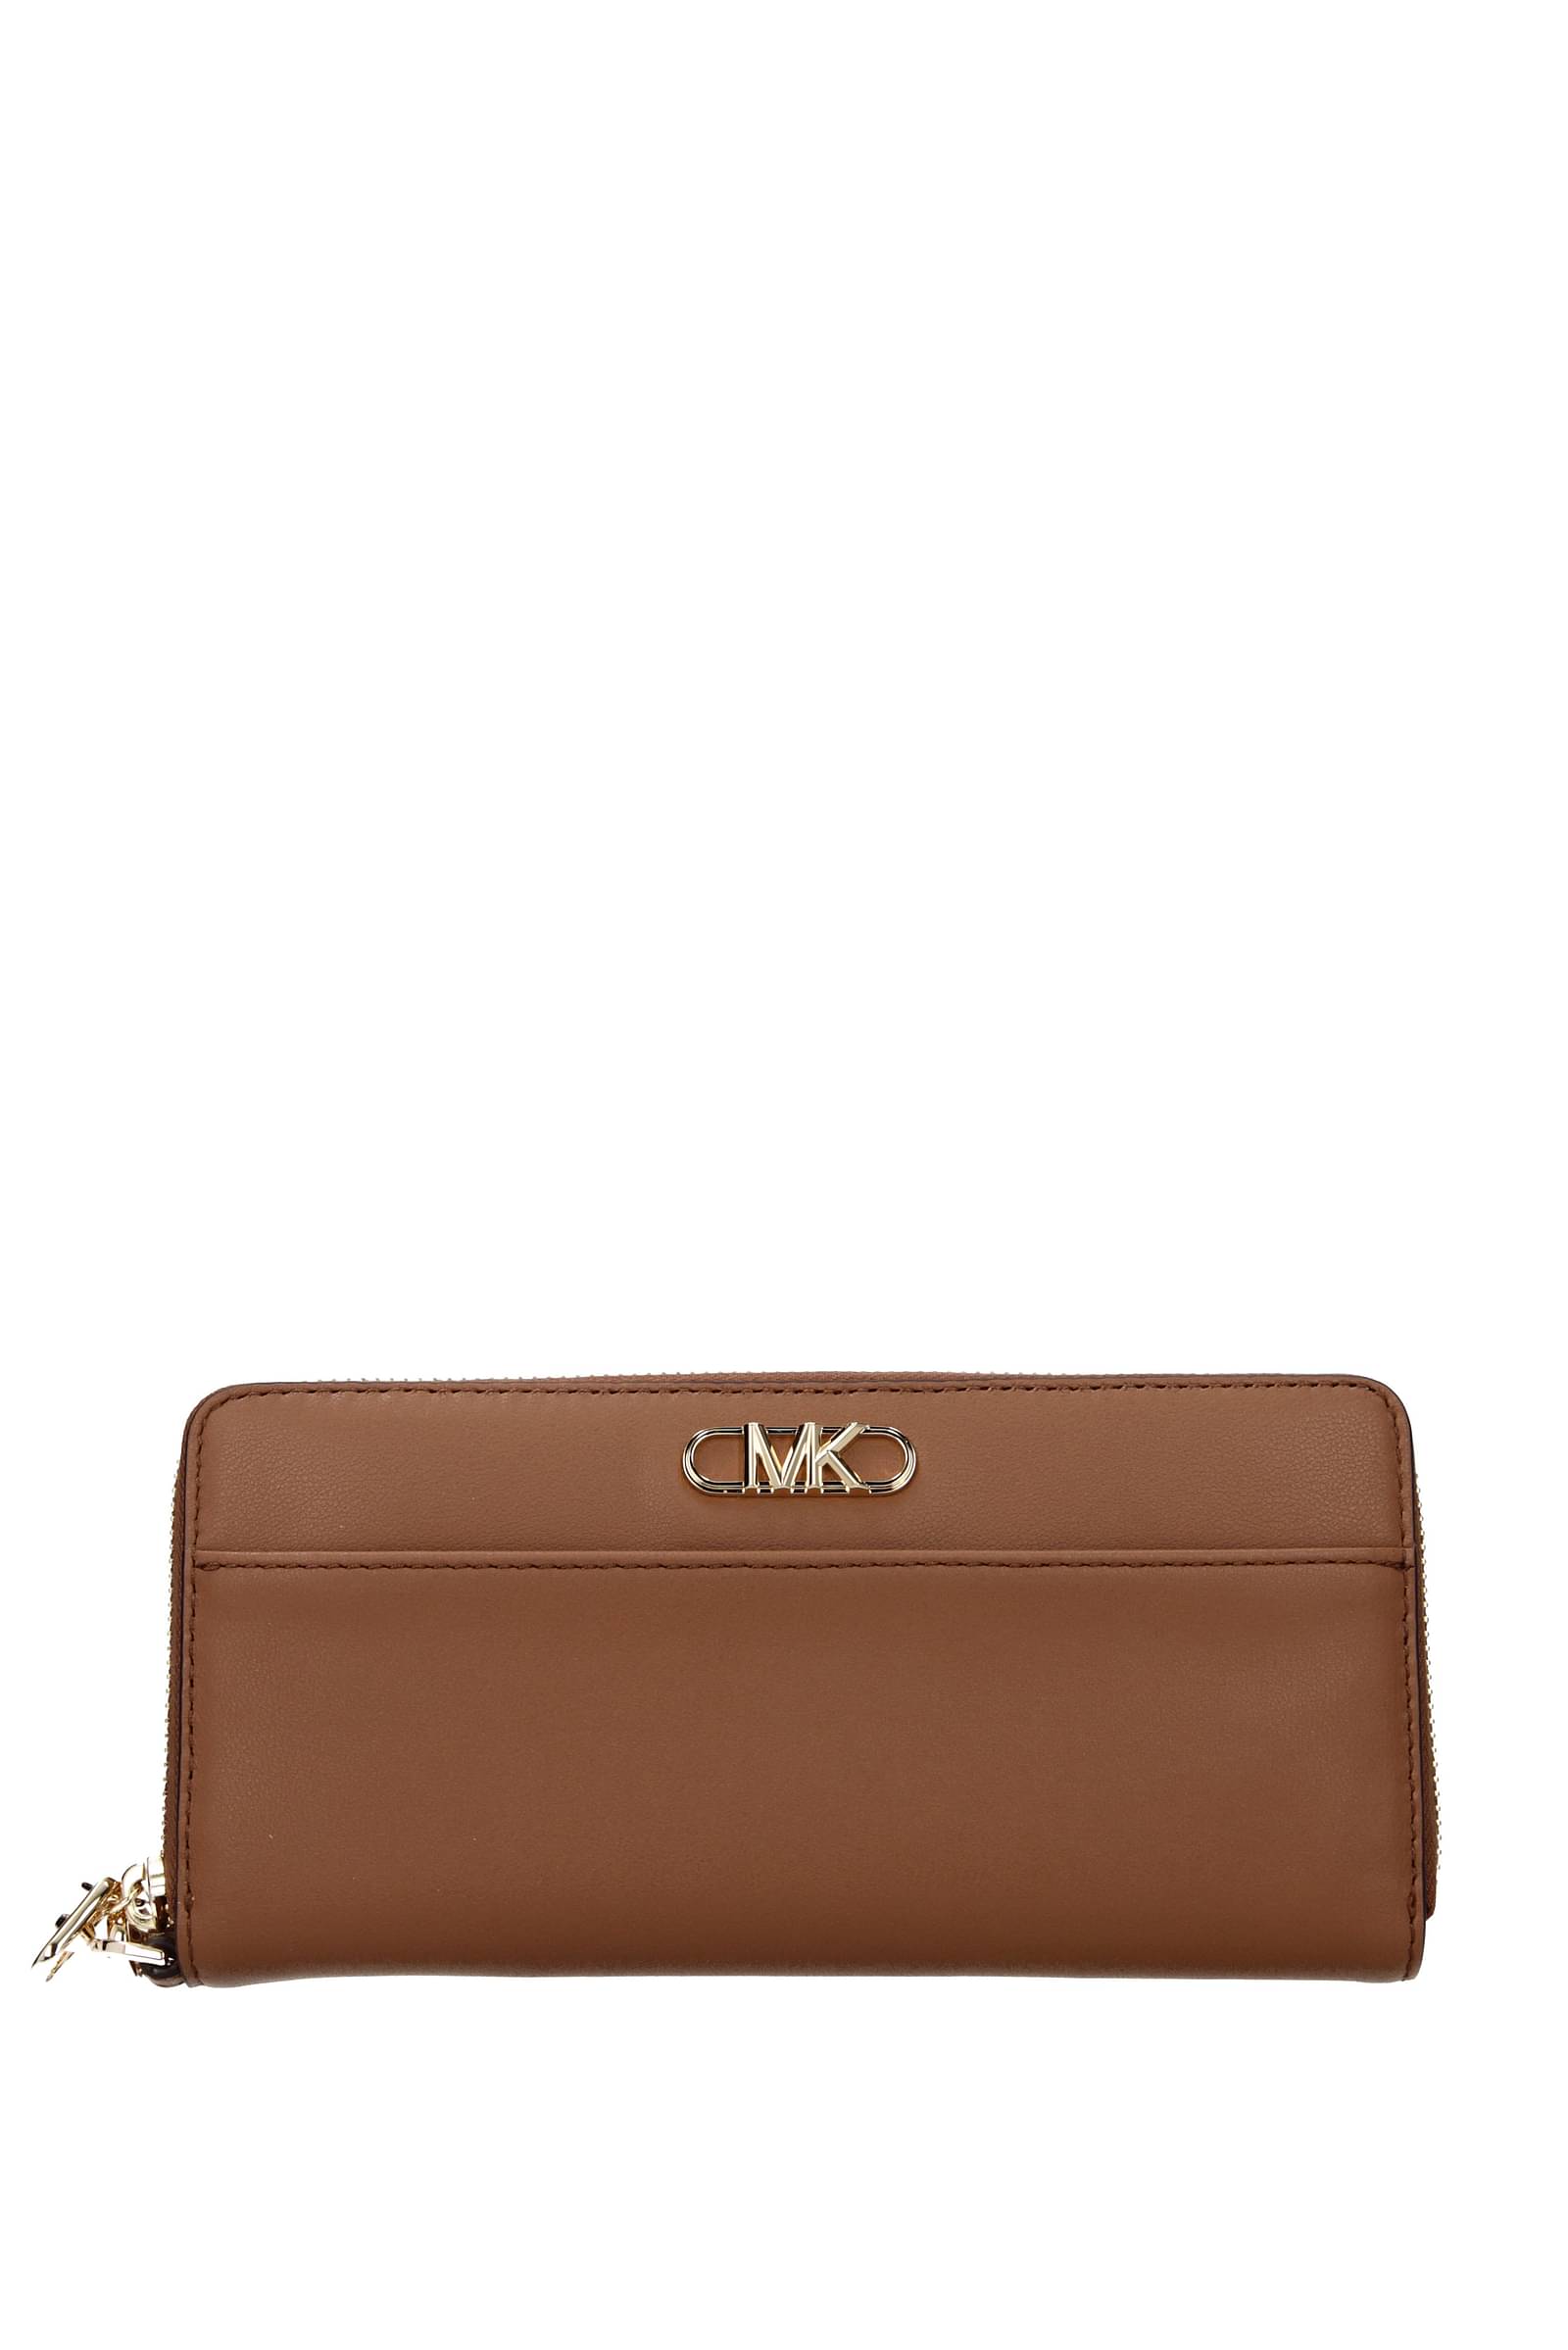 Welcome to Michael Kors Outlet Online Store, Larger Discount! | Handbags  michael kors, Michael kors outlet, Michael kors outlet online